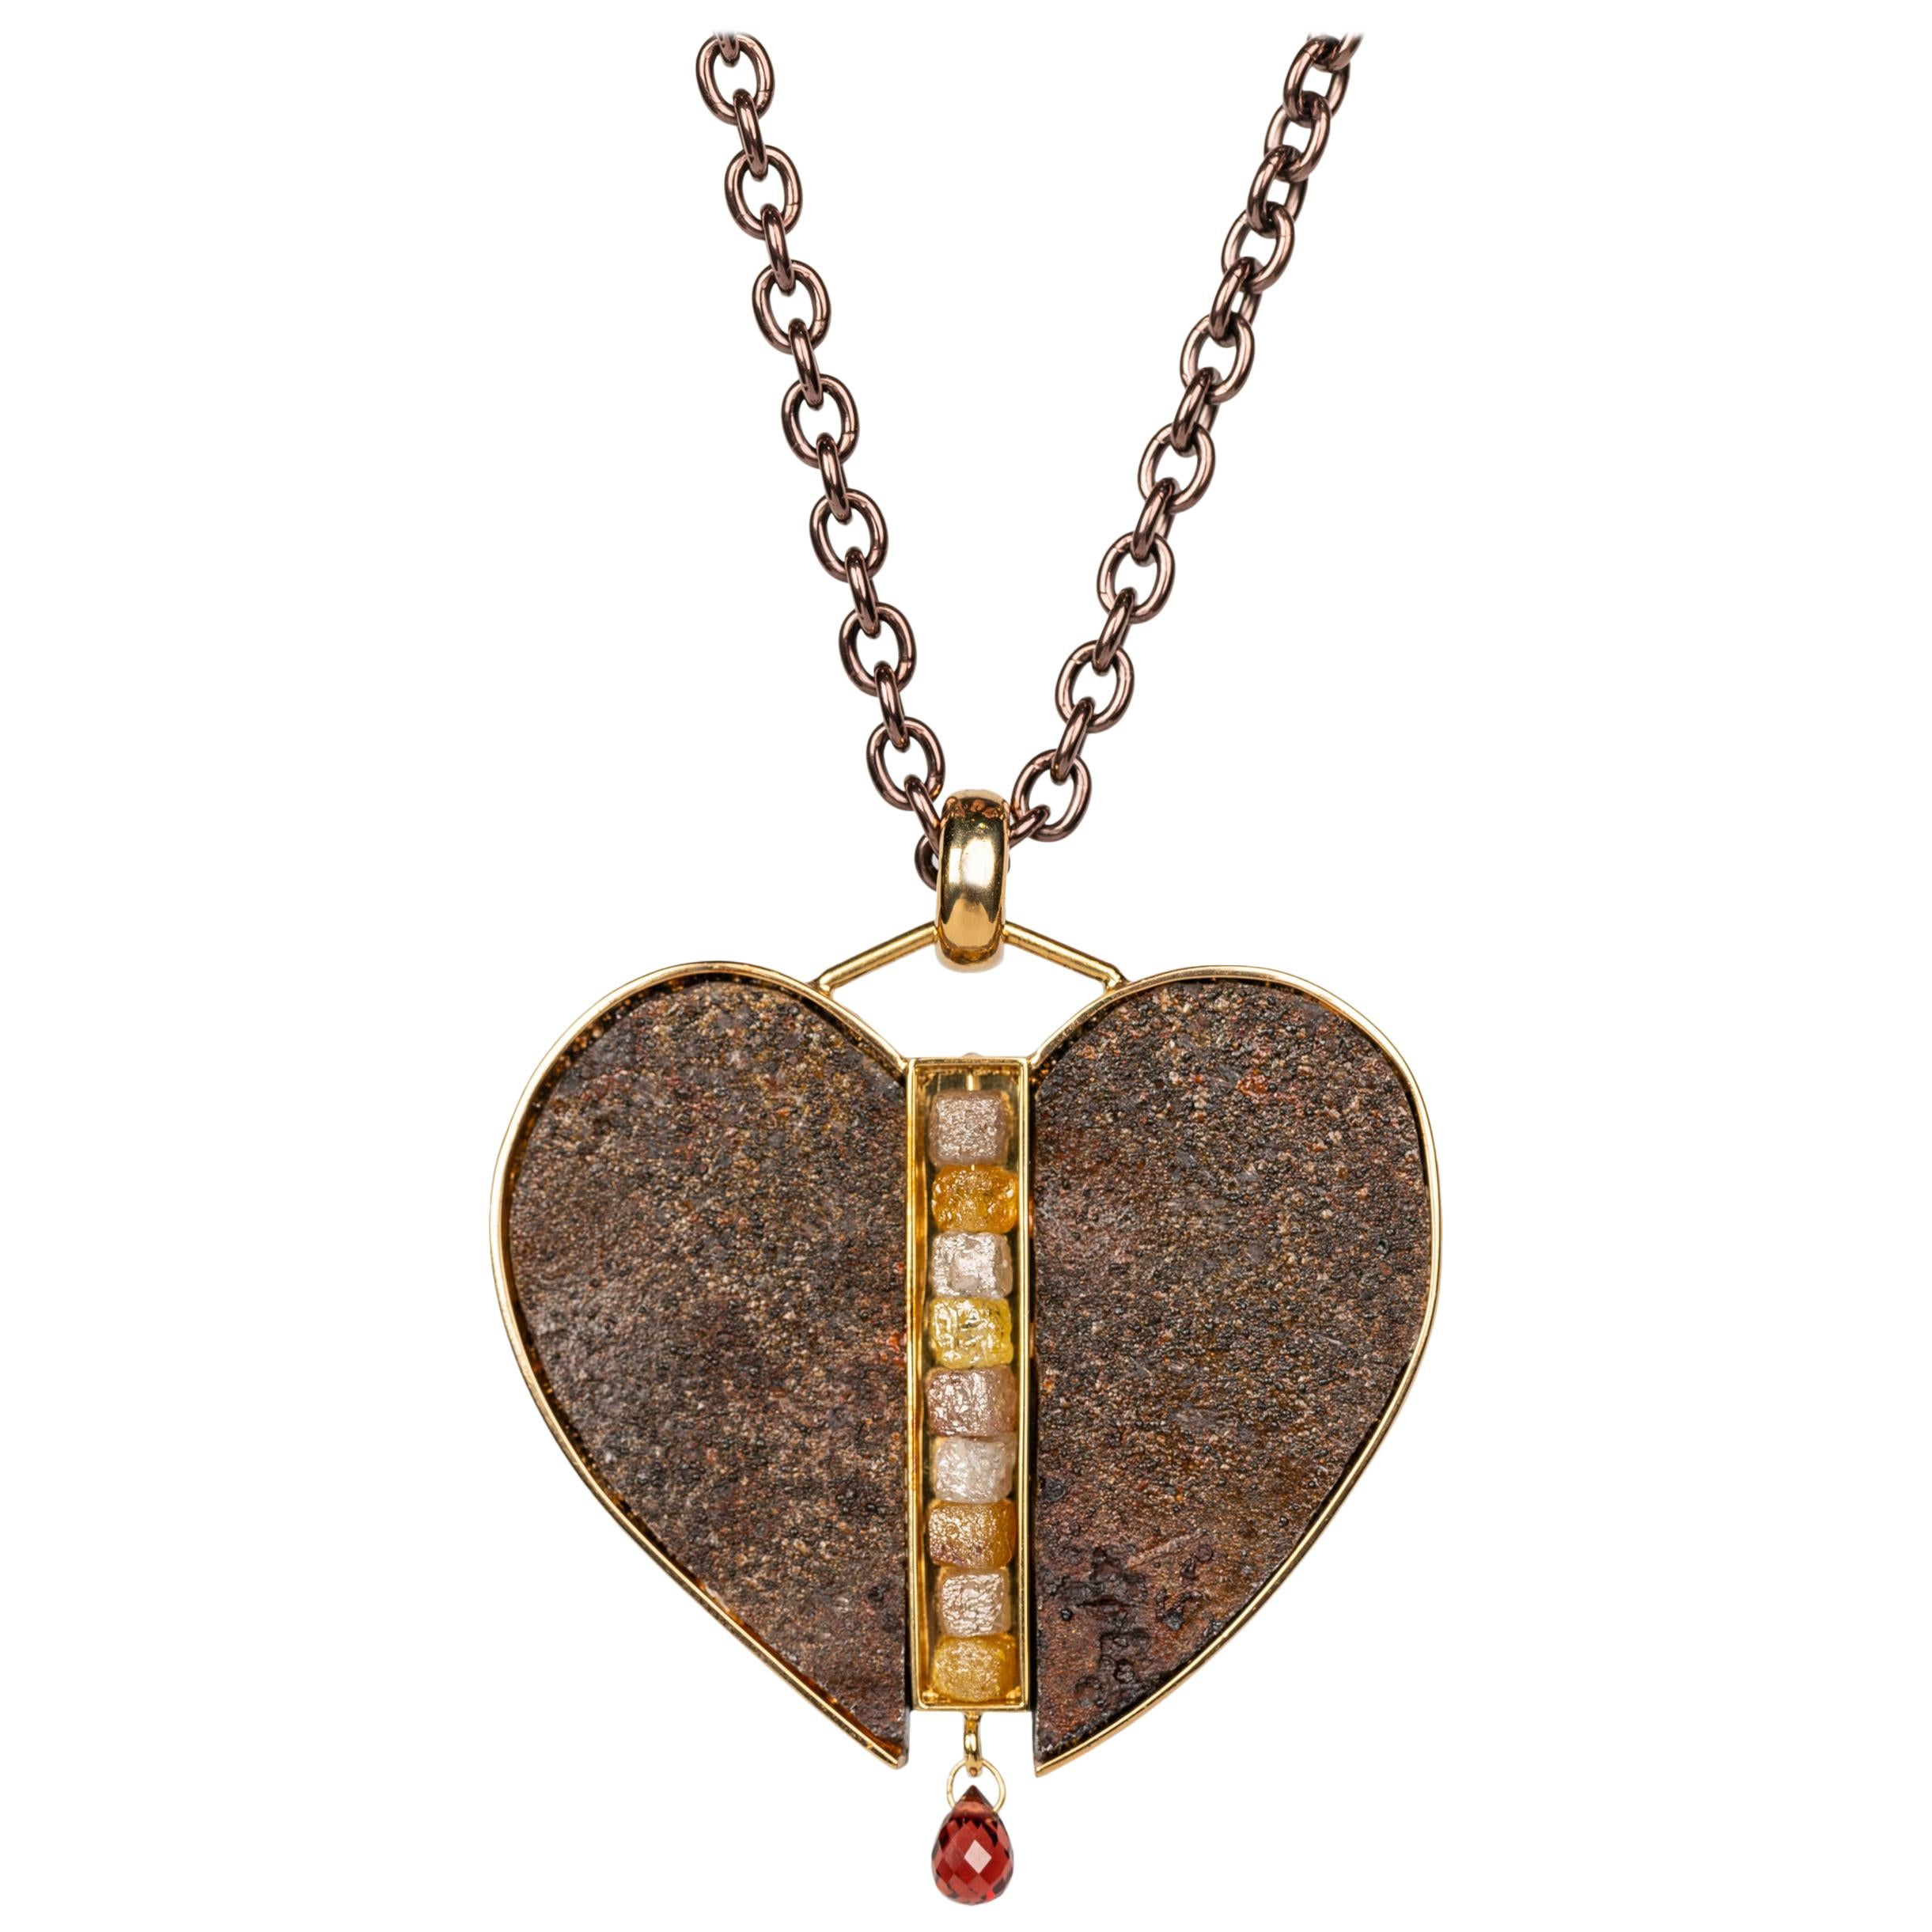 18 Karat Sterling Silver and Rusted Iron Heart Necklace with Garnet and Diamonds